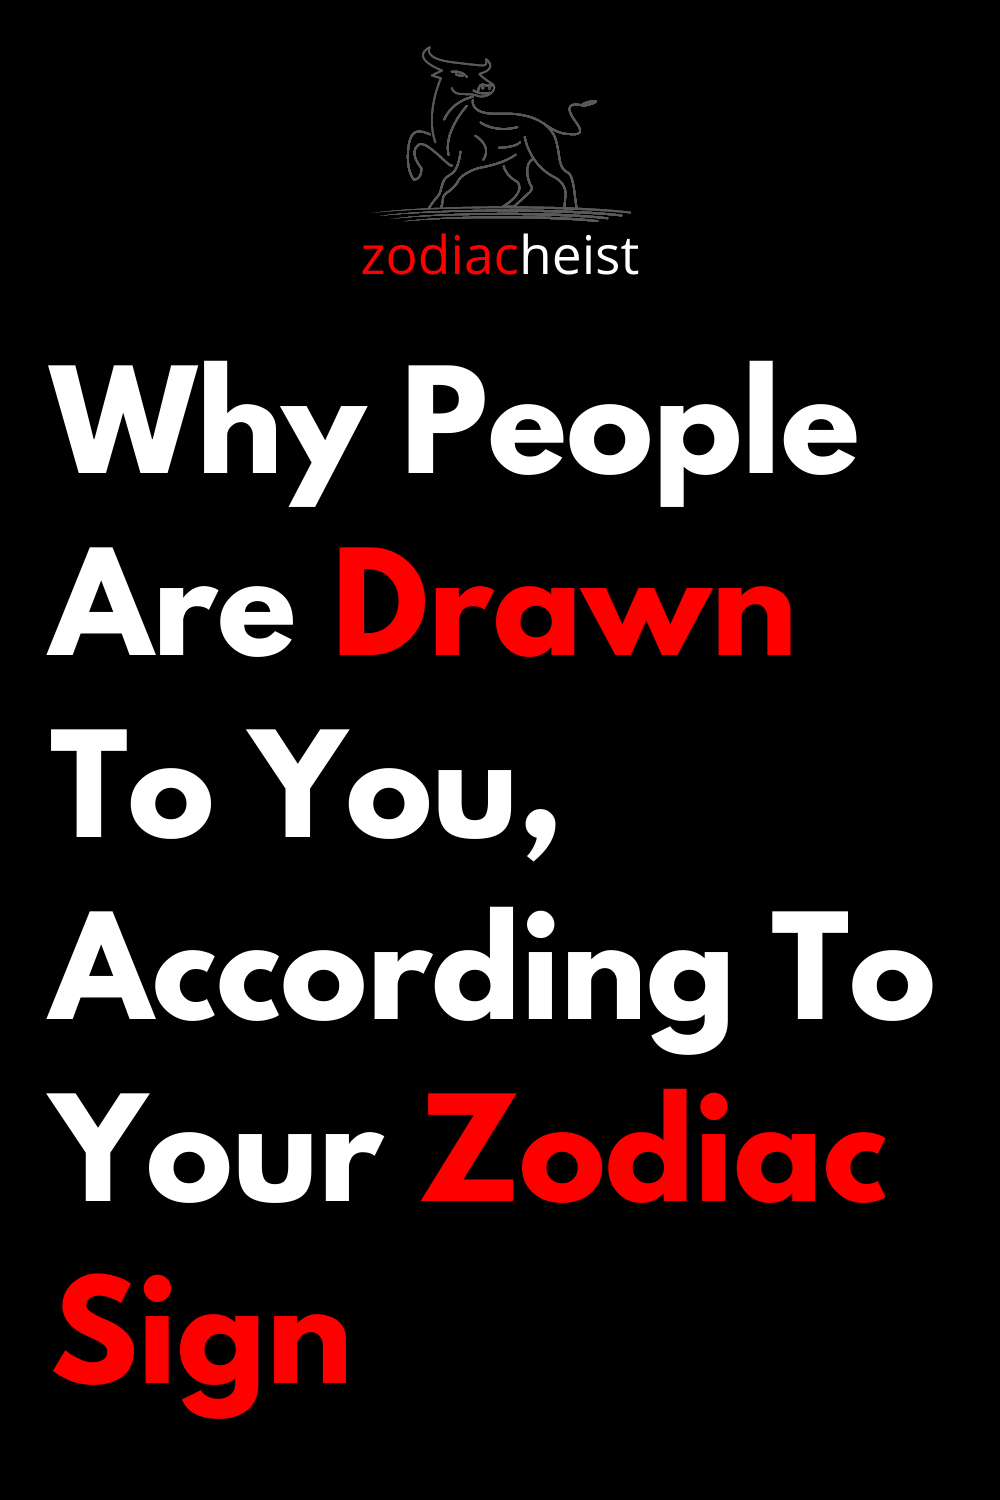 Why People Are Drawn To You, According To Your Zodiac Sign